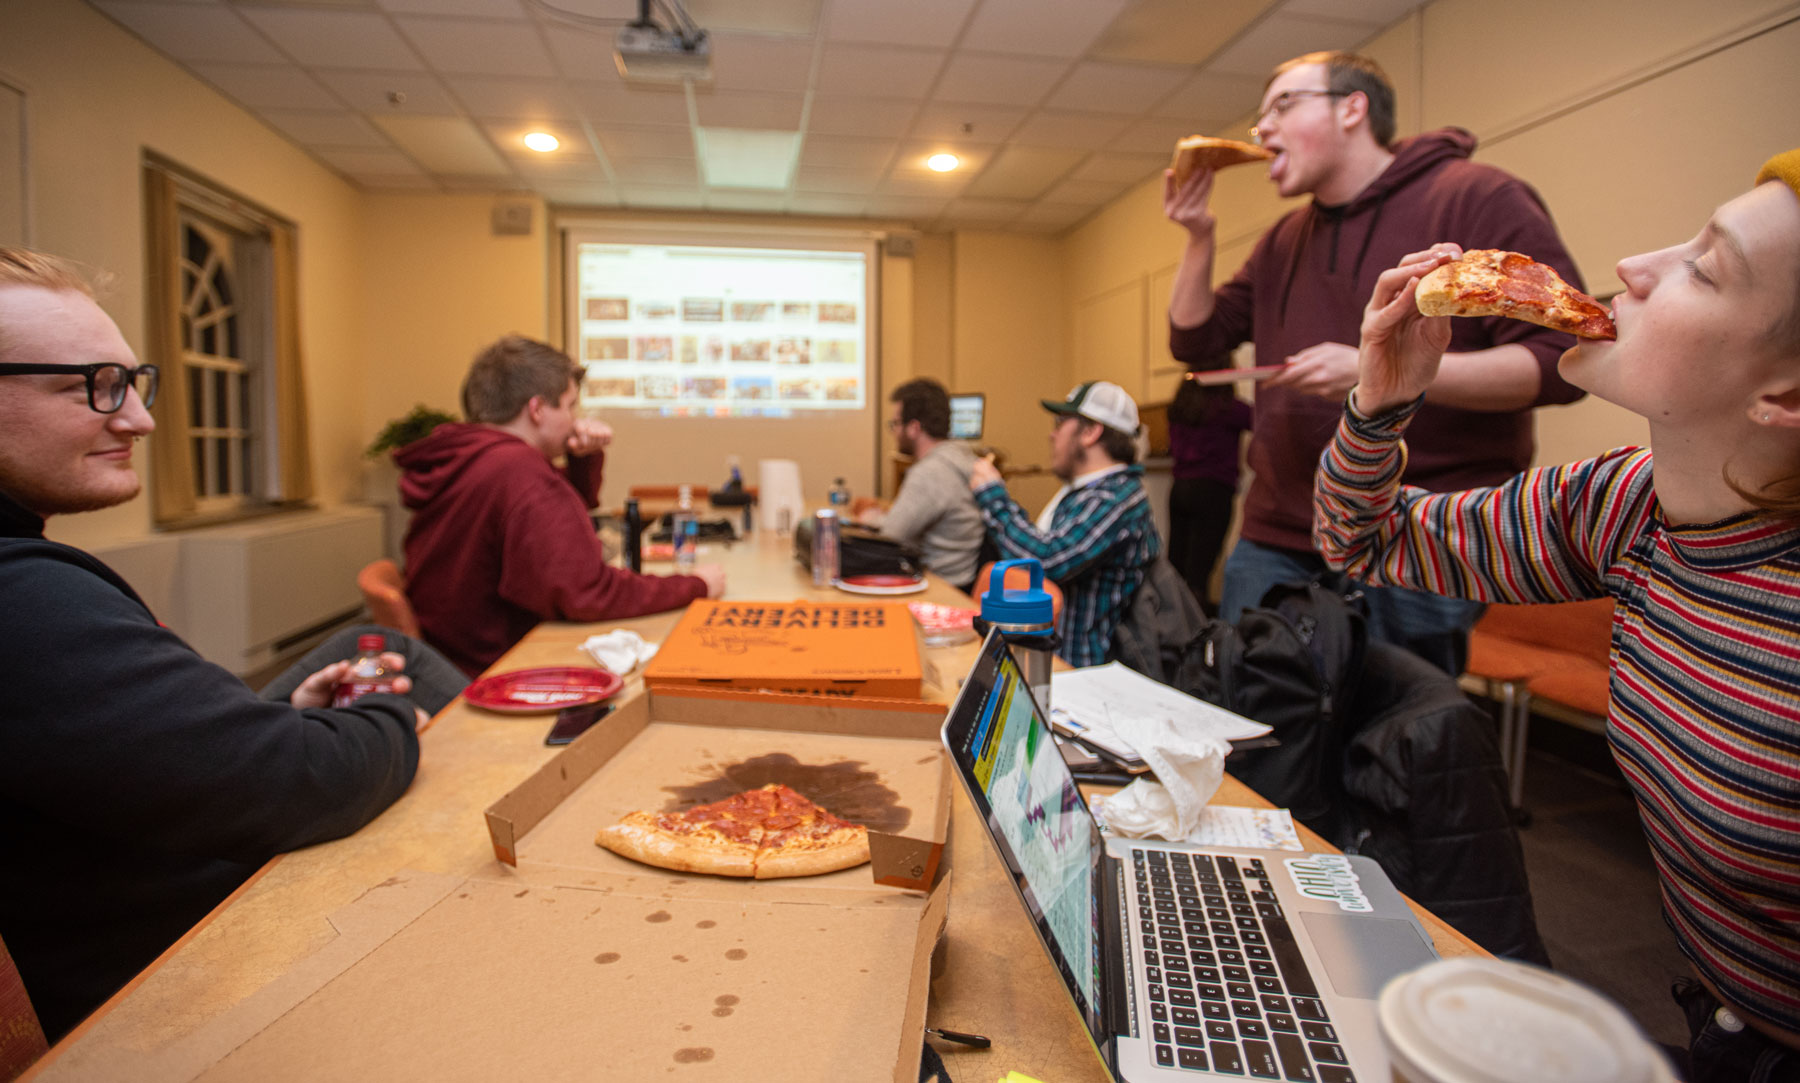 Students enjoying pizza during a planning session